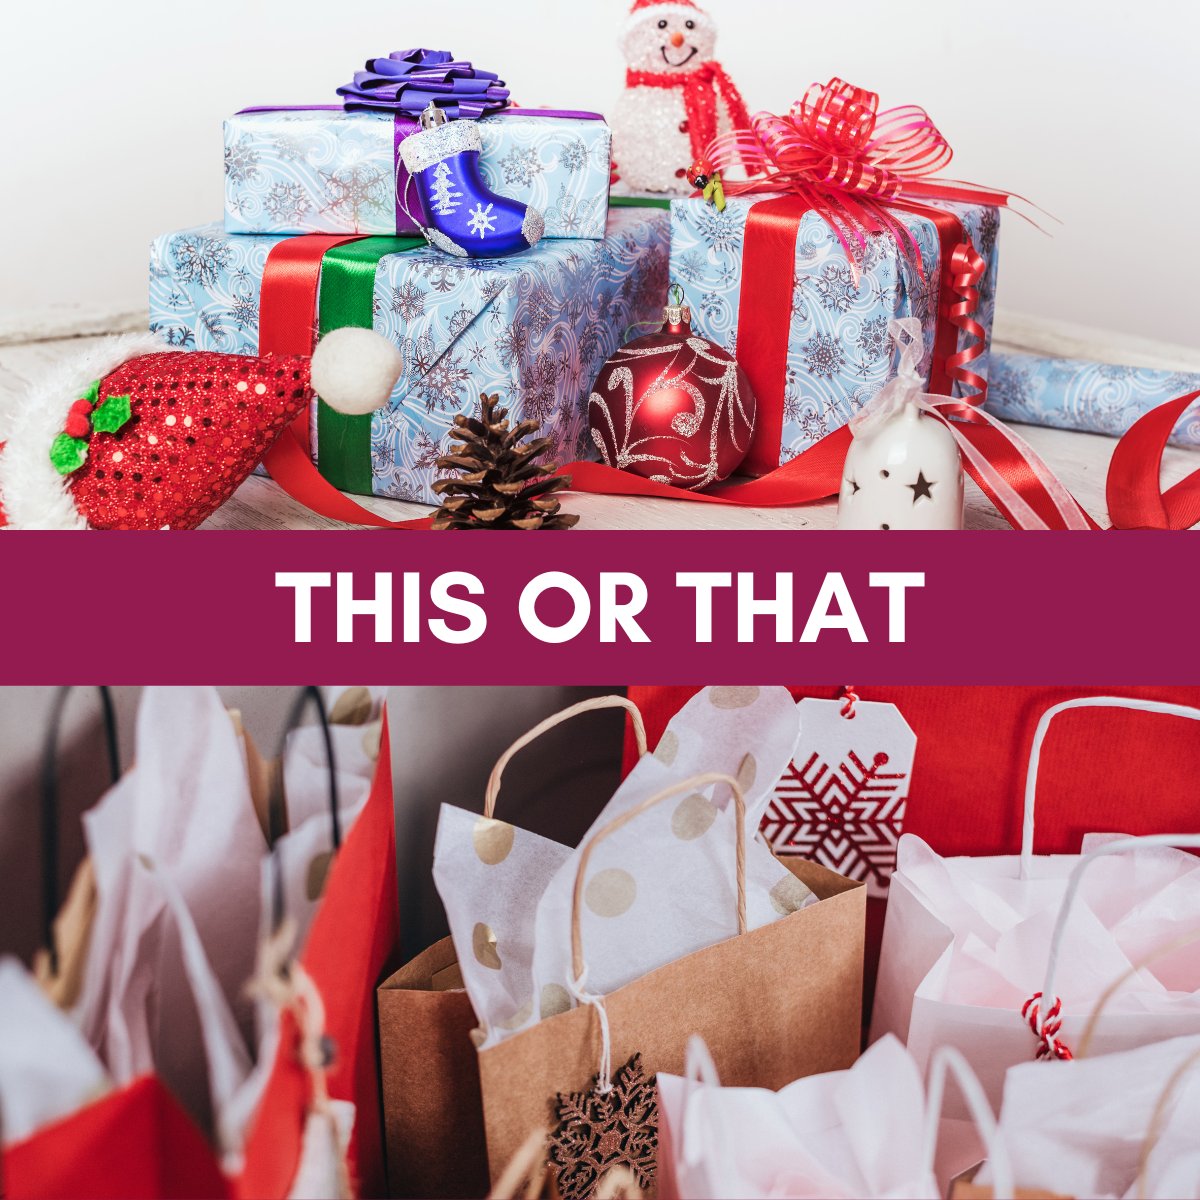 The one task we could all do without is wrapping gifts.🎄🎁🏘️
Are you team wrapping paper or gift bags❓
#christmasgifts #thisorthat #wrappingpaper #giftbags #whichdoyouprefer #underthetree #holidayprep #realtor #KathiMeyerSullivan #KMSrealtor #BHHSevolution #realestate #theDSGal